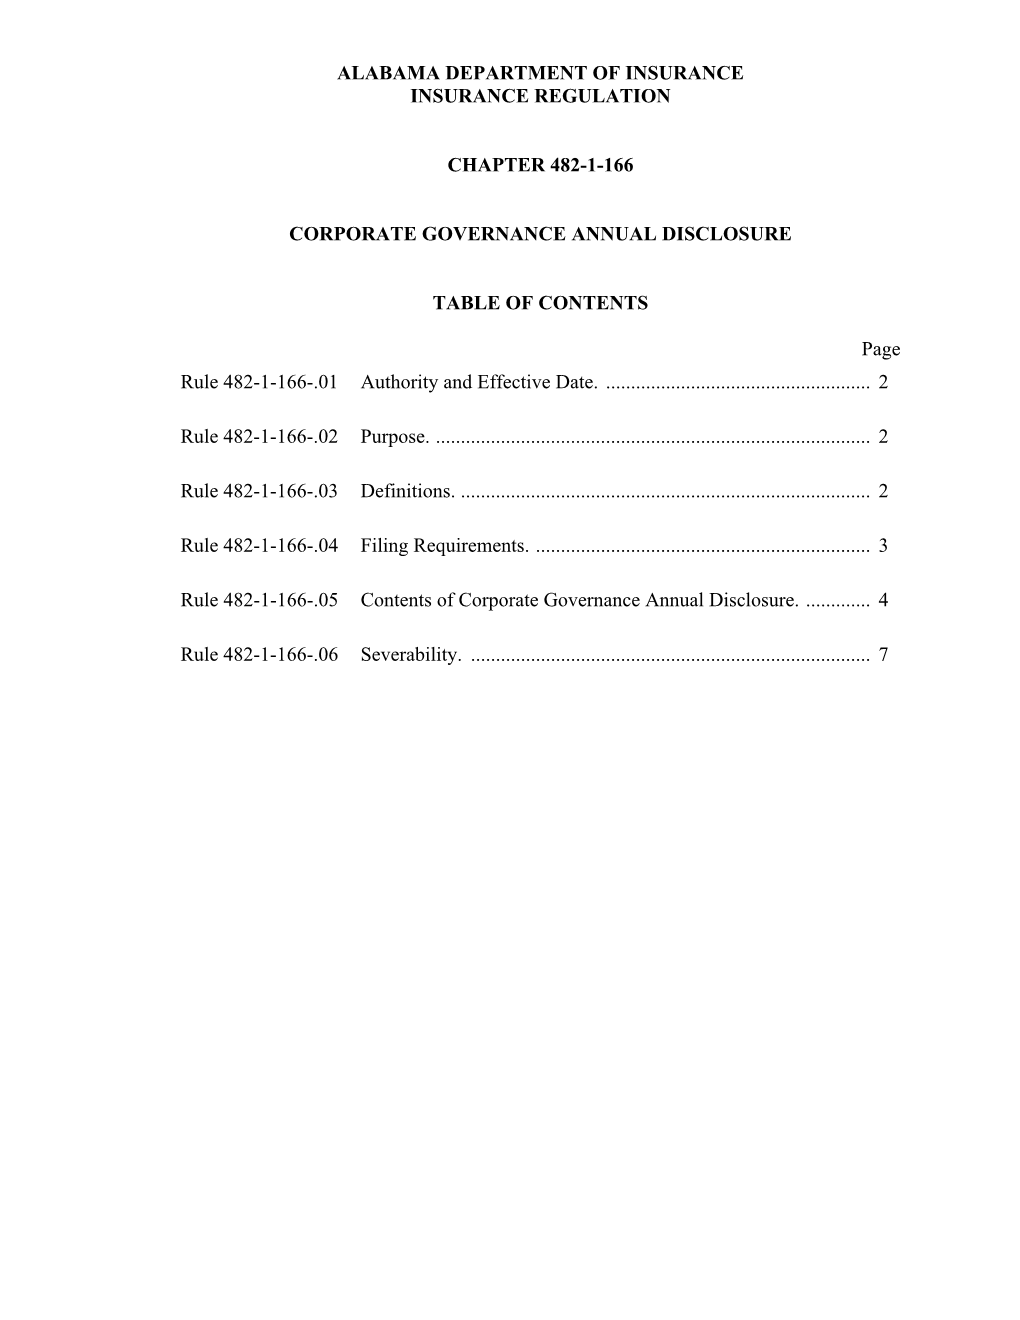 Alabama Department of Insurance Insurance Regulation Chapter 482-1-166 Corporate Governance Annual Disclosure Table of Contents